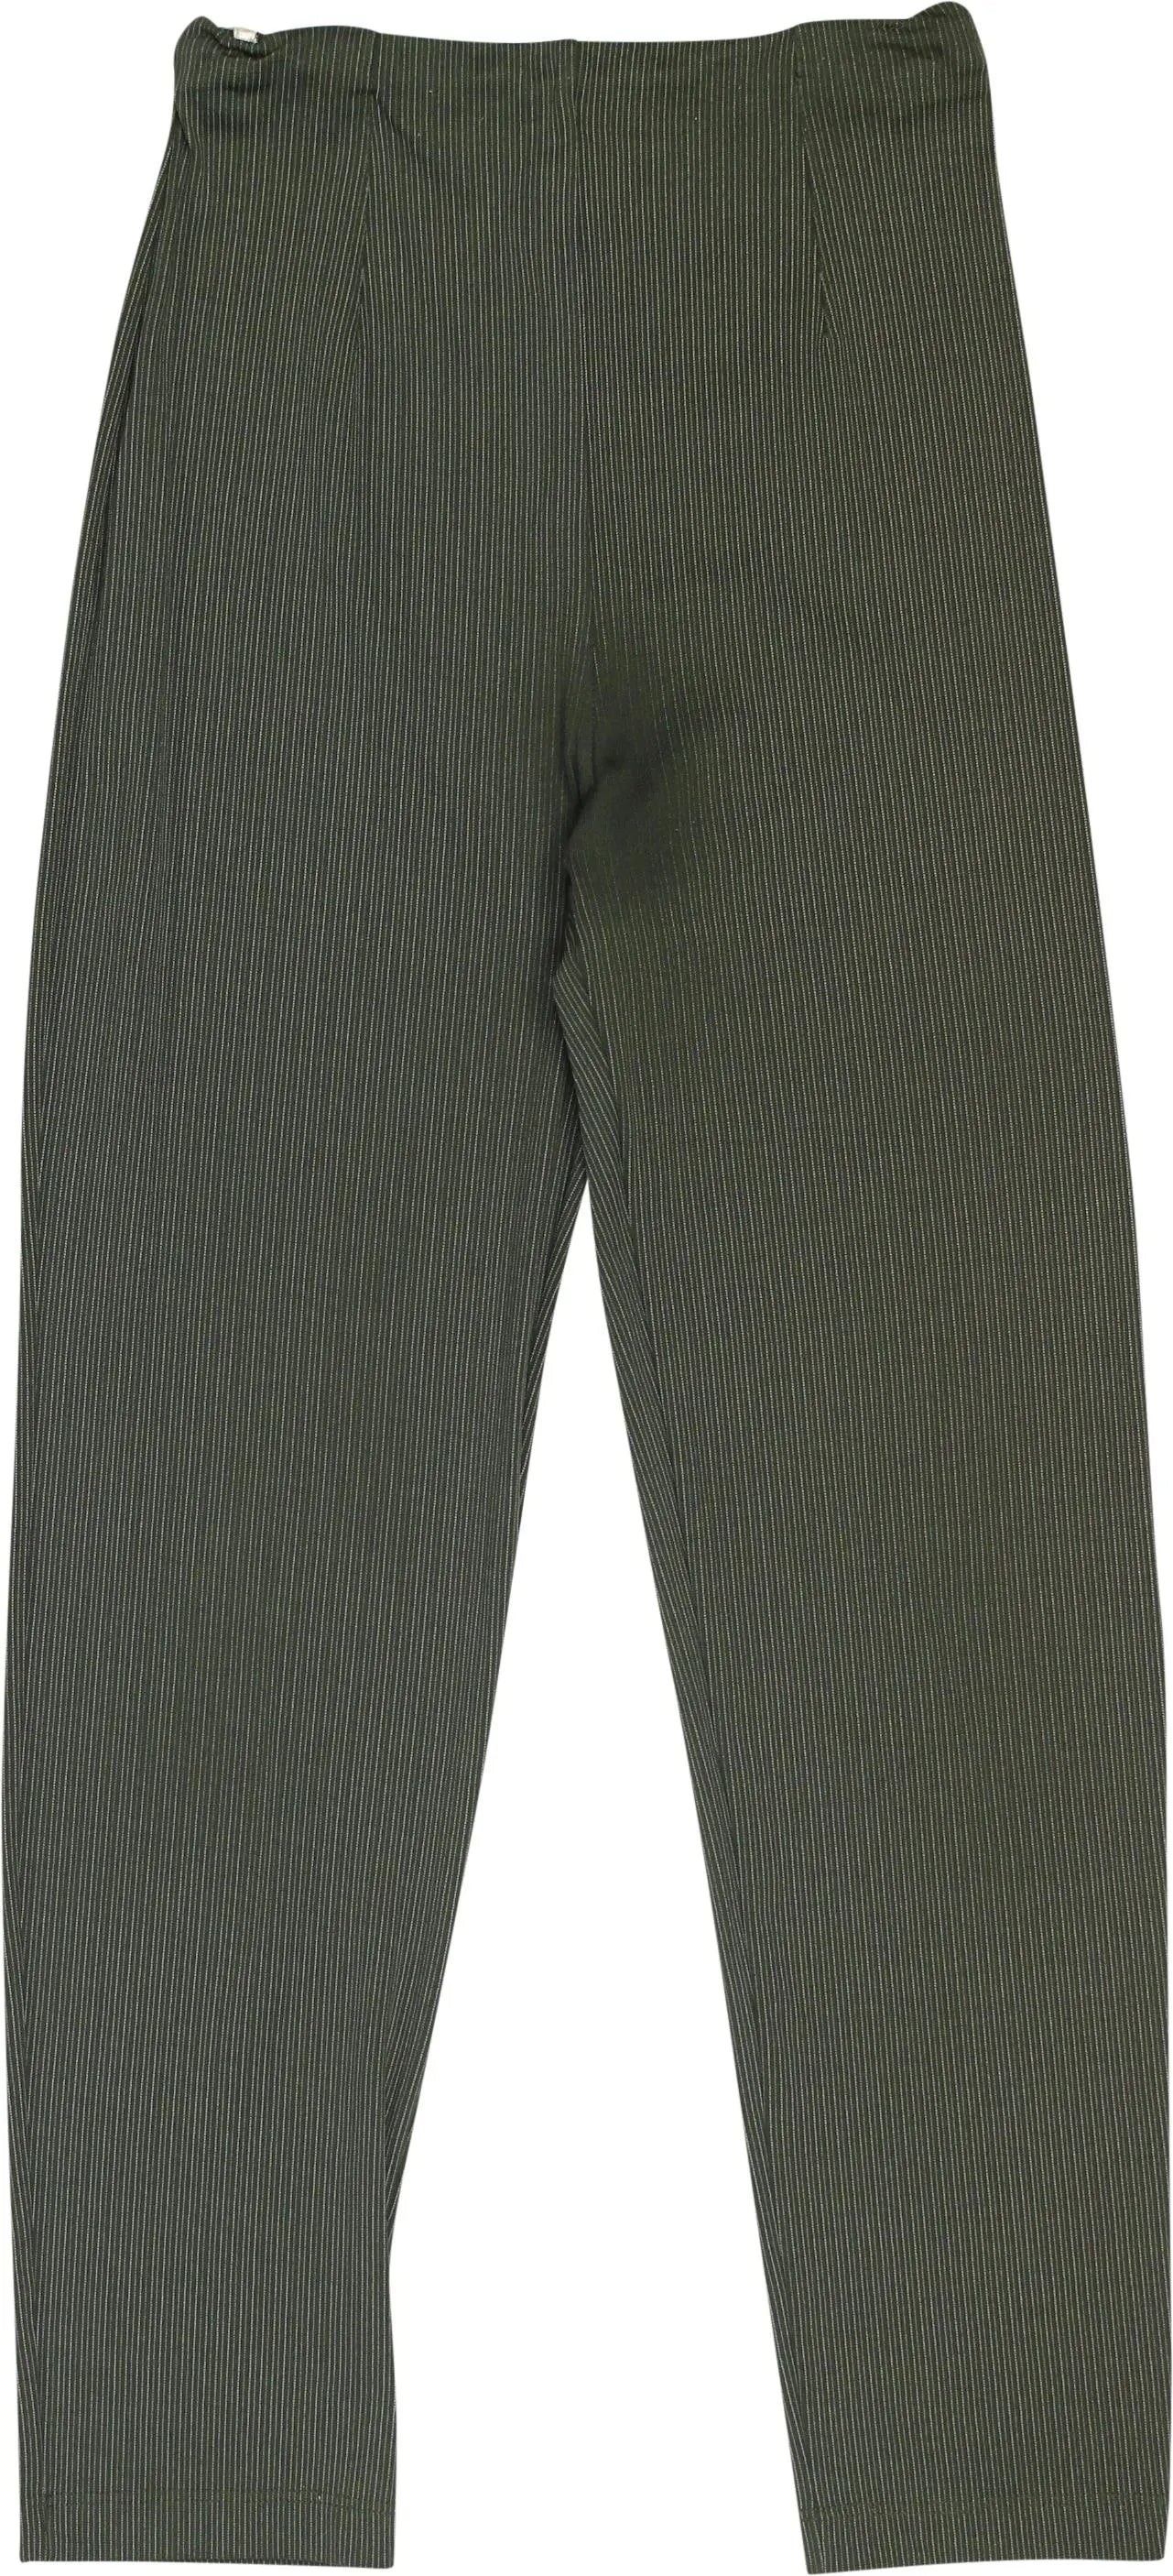 M&S - Green Striped Trousers- ThriftTale.com - Vintage and second handclothing